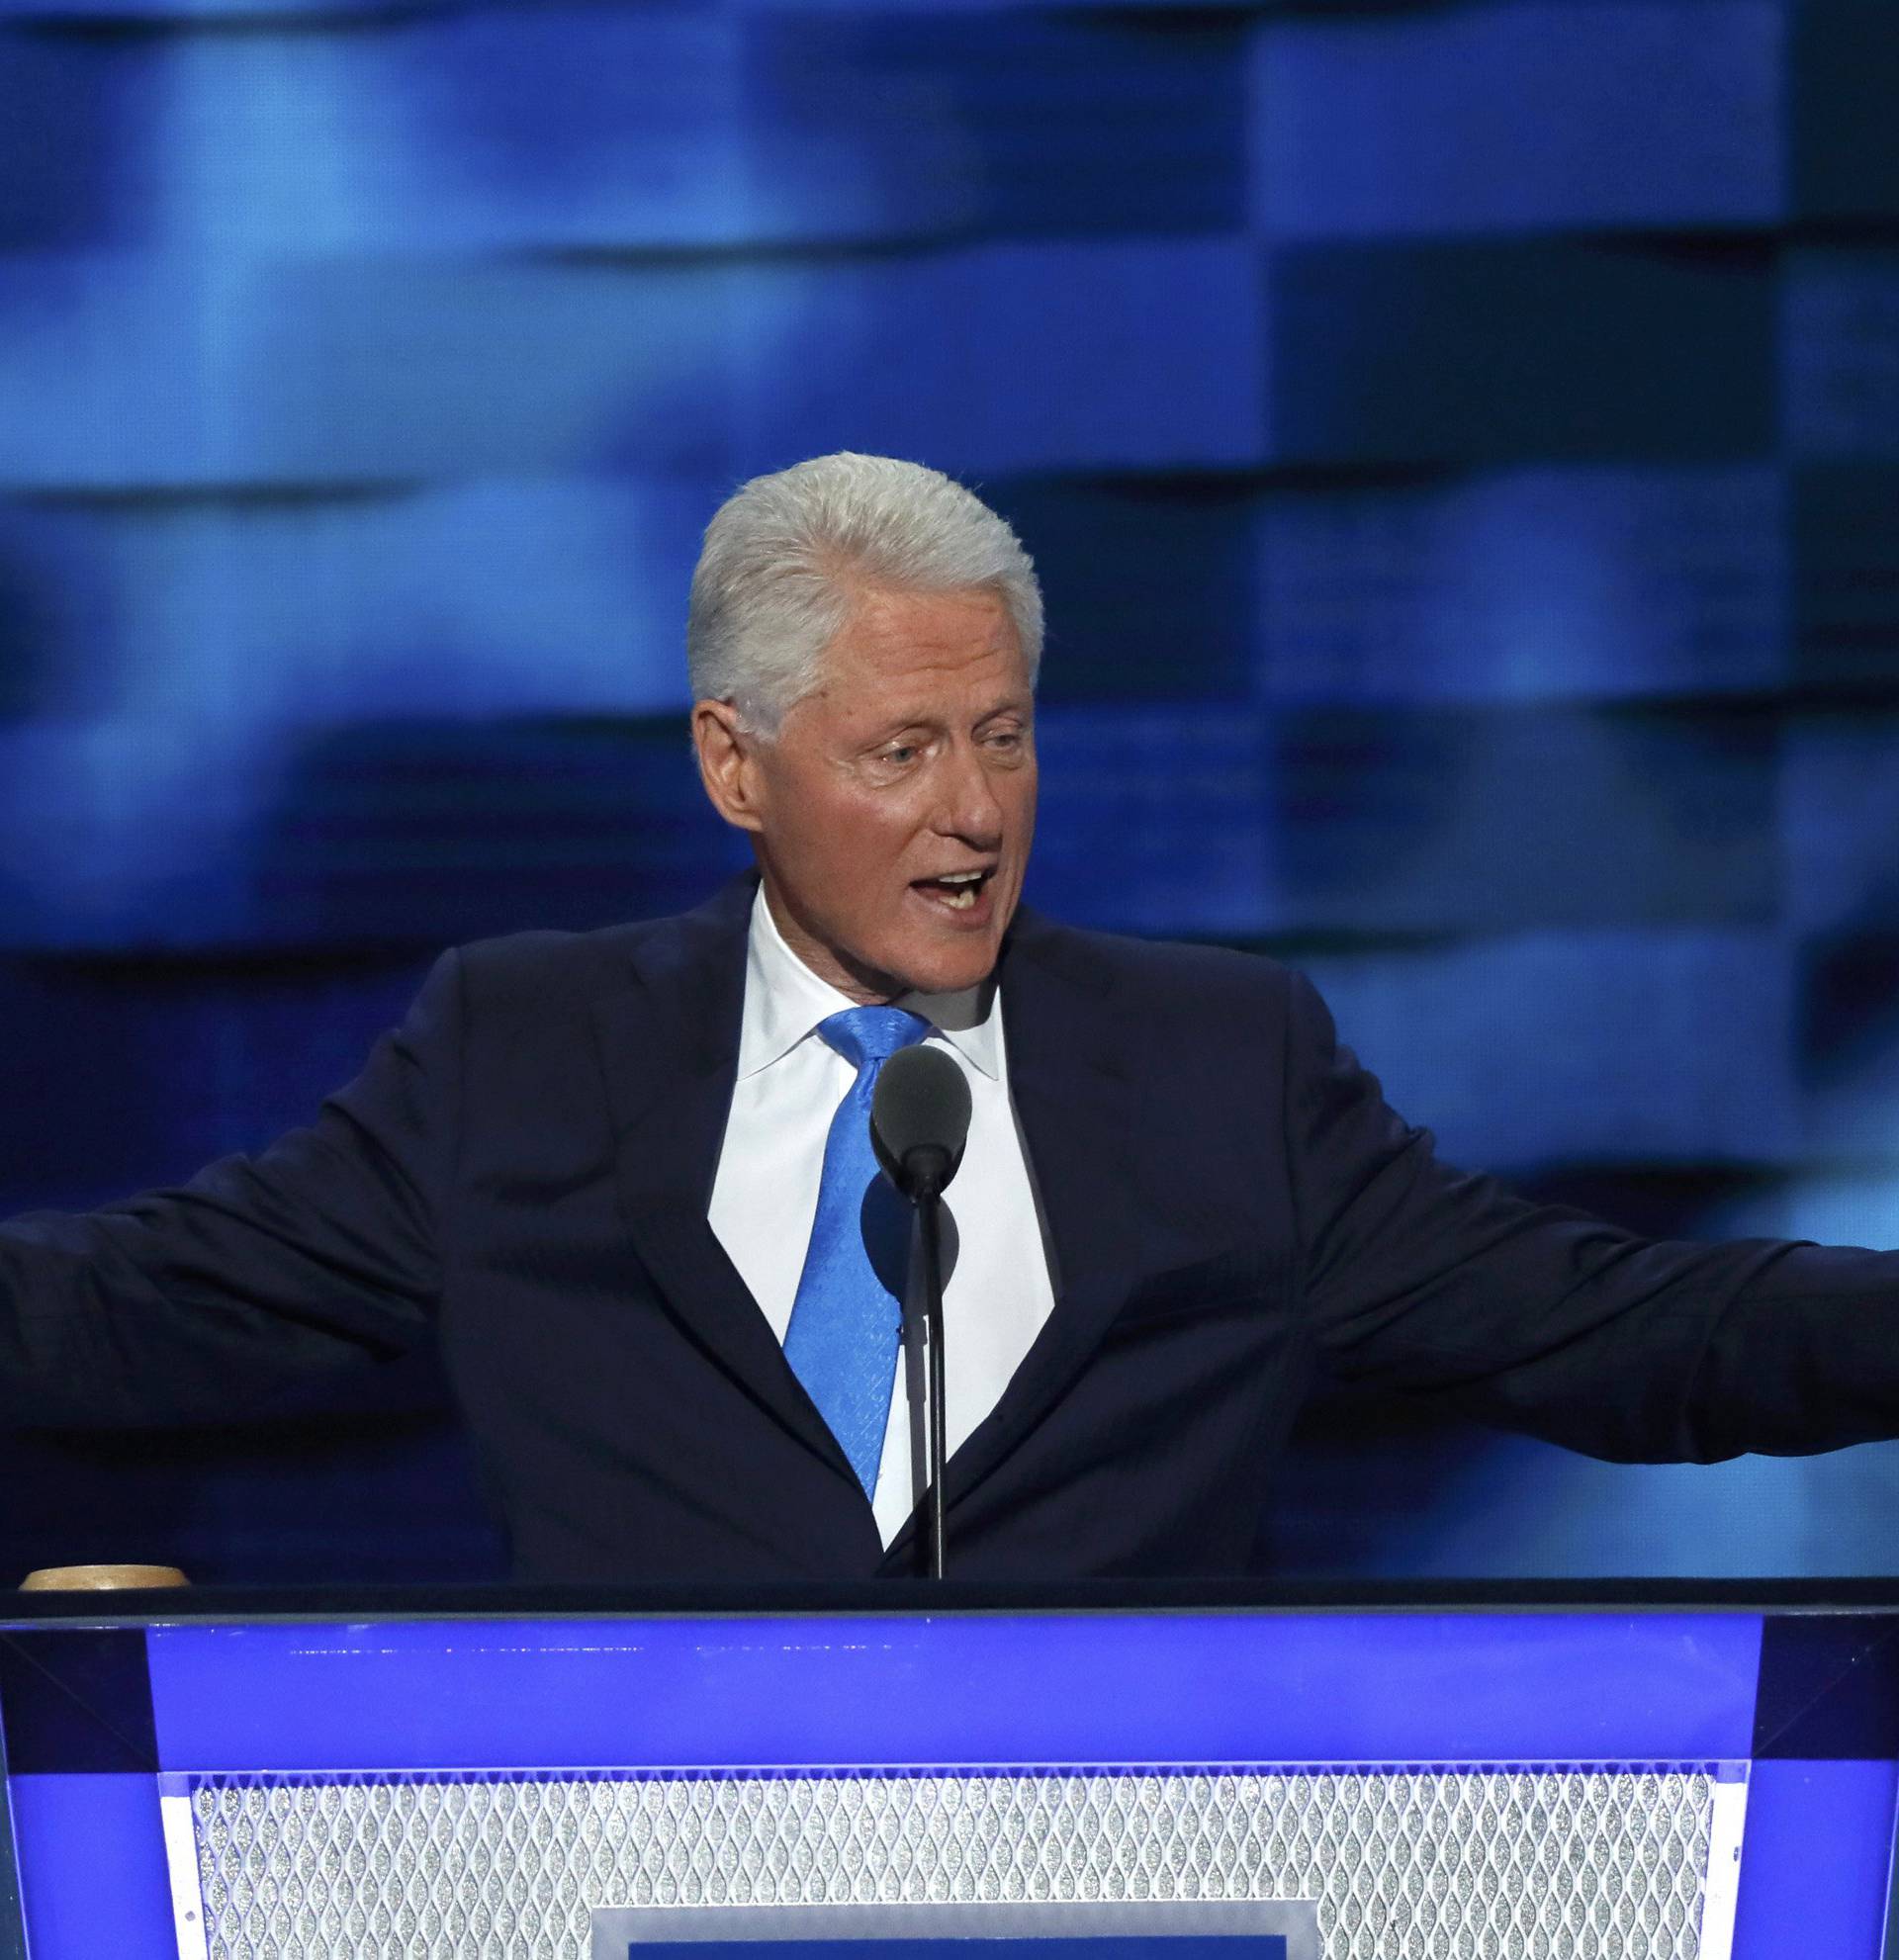 Former U.S. President Bill Clinton speaks at the Democratic National Convention in Philadelphia